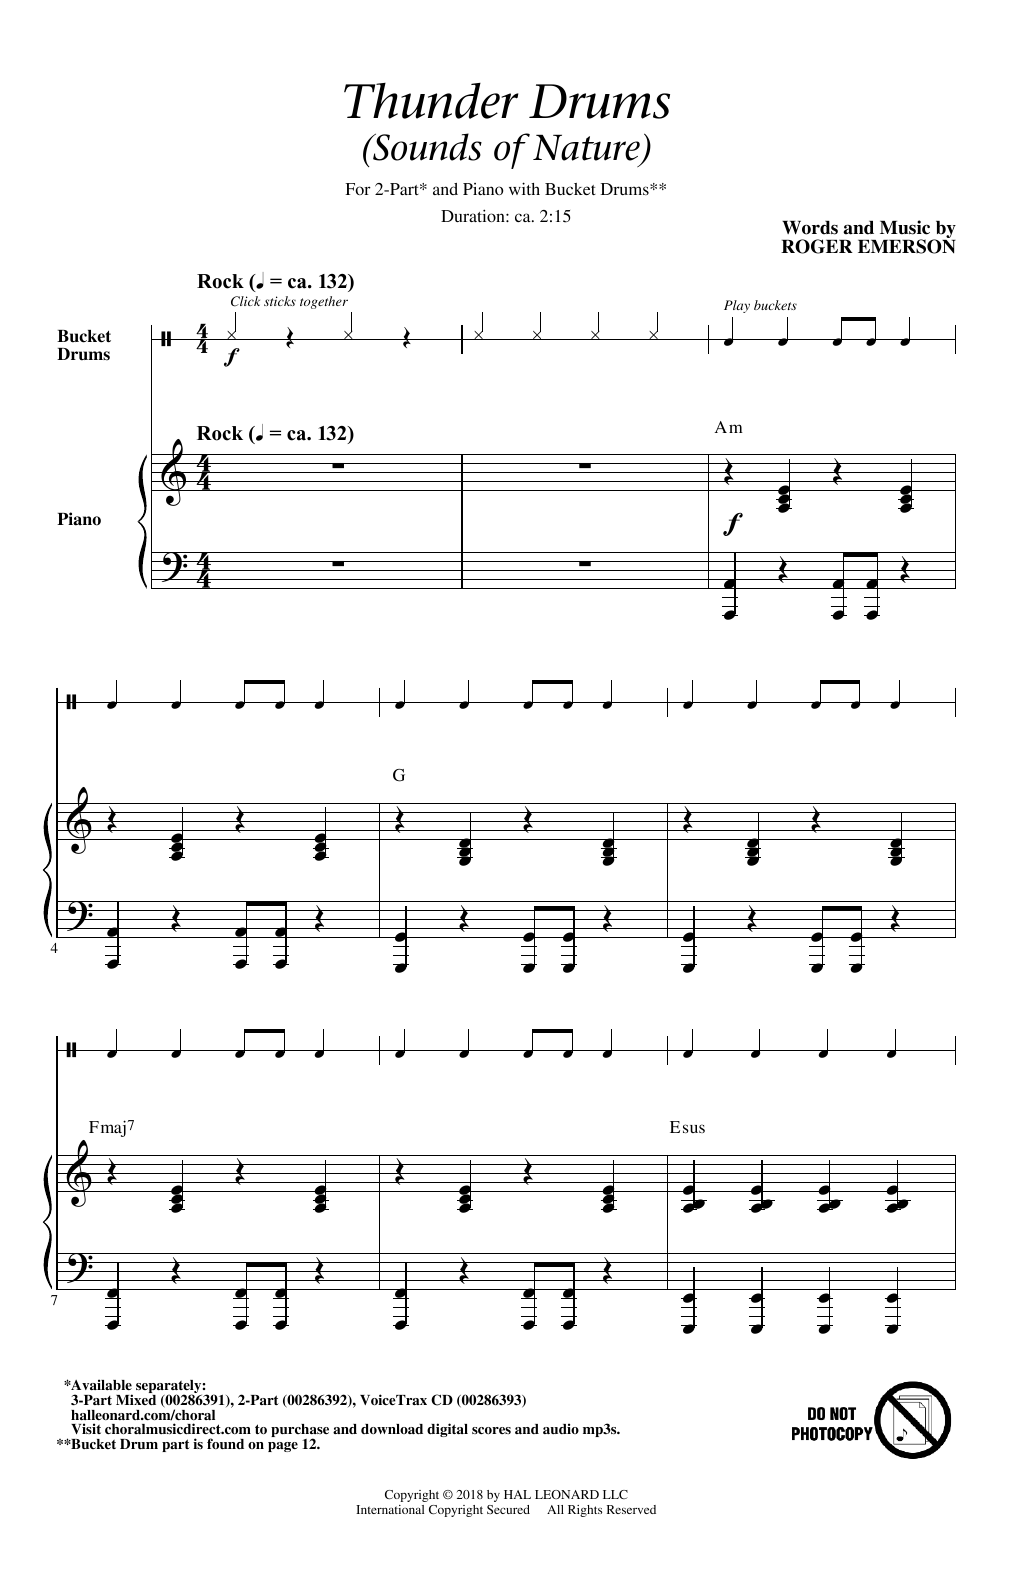 Download Roger Emerson Thunder Drums Sheet Music